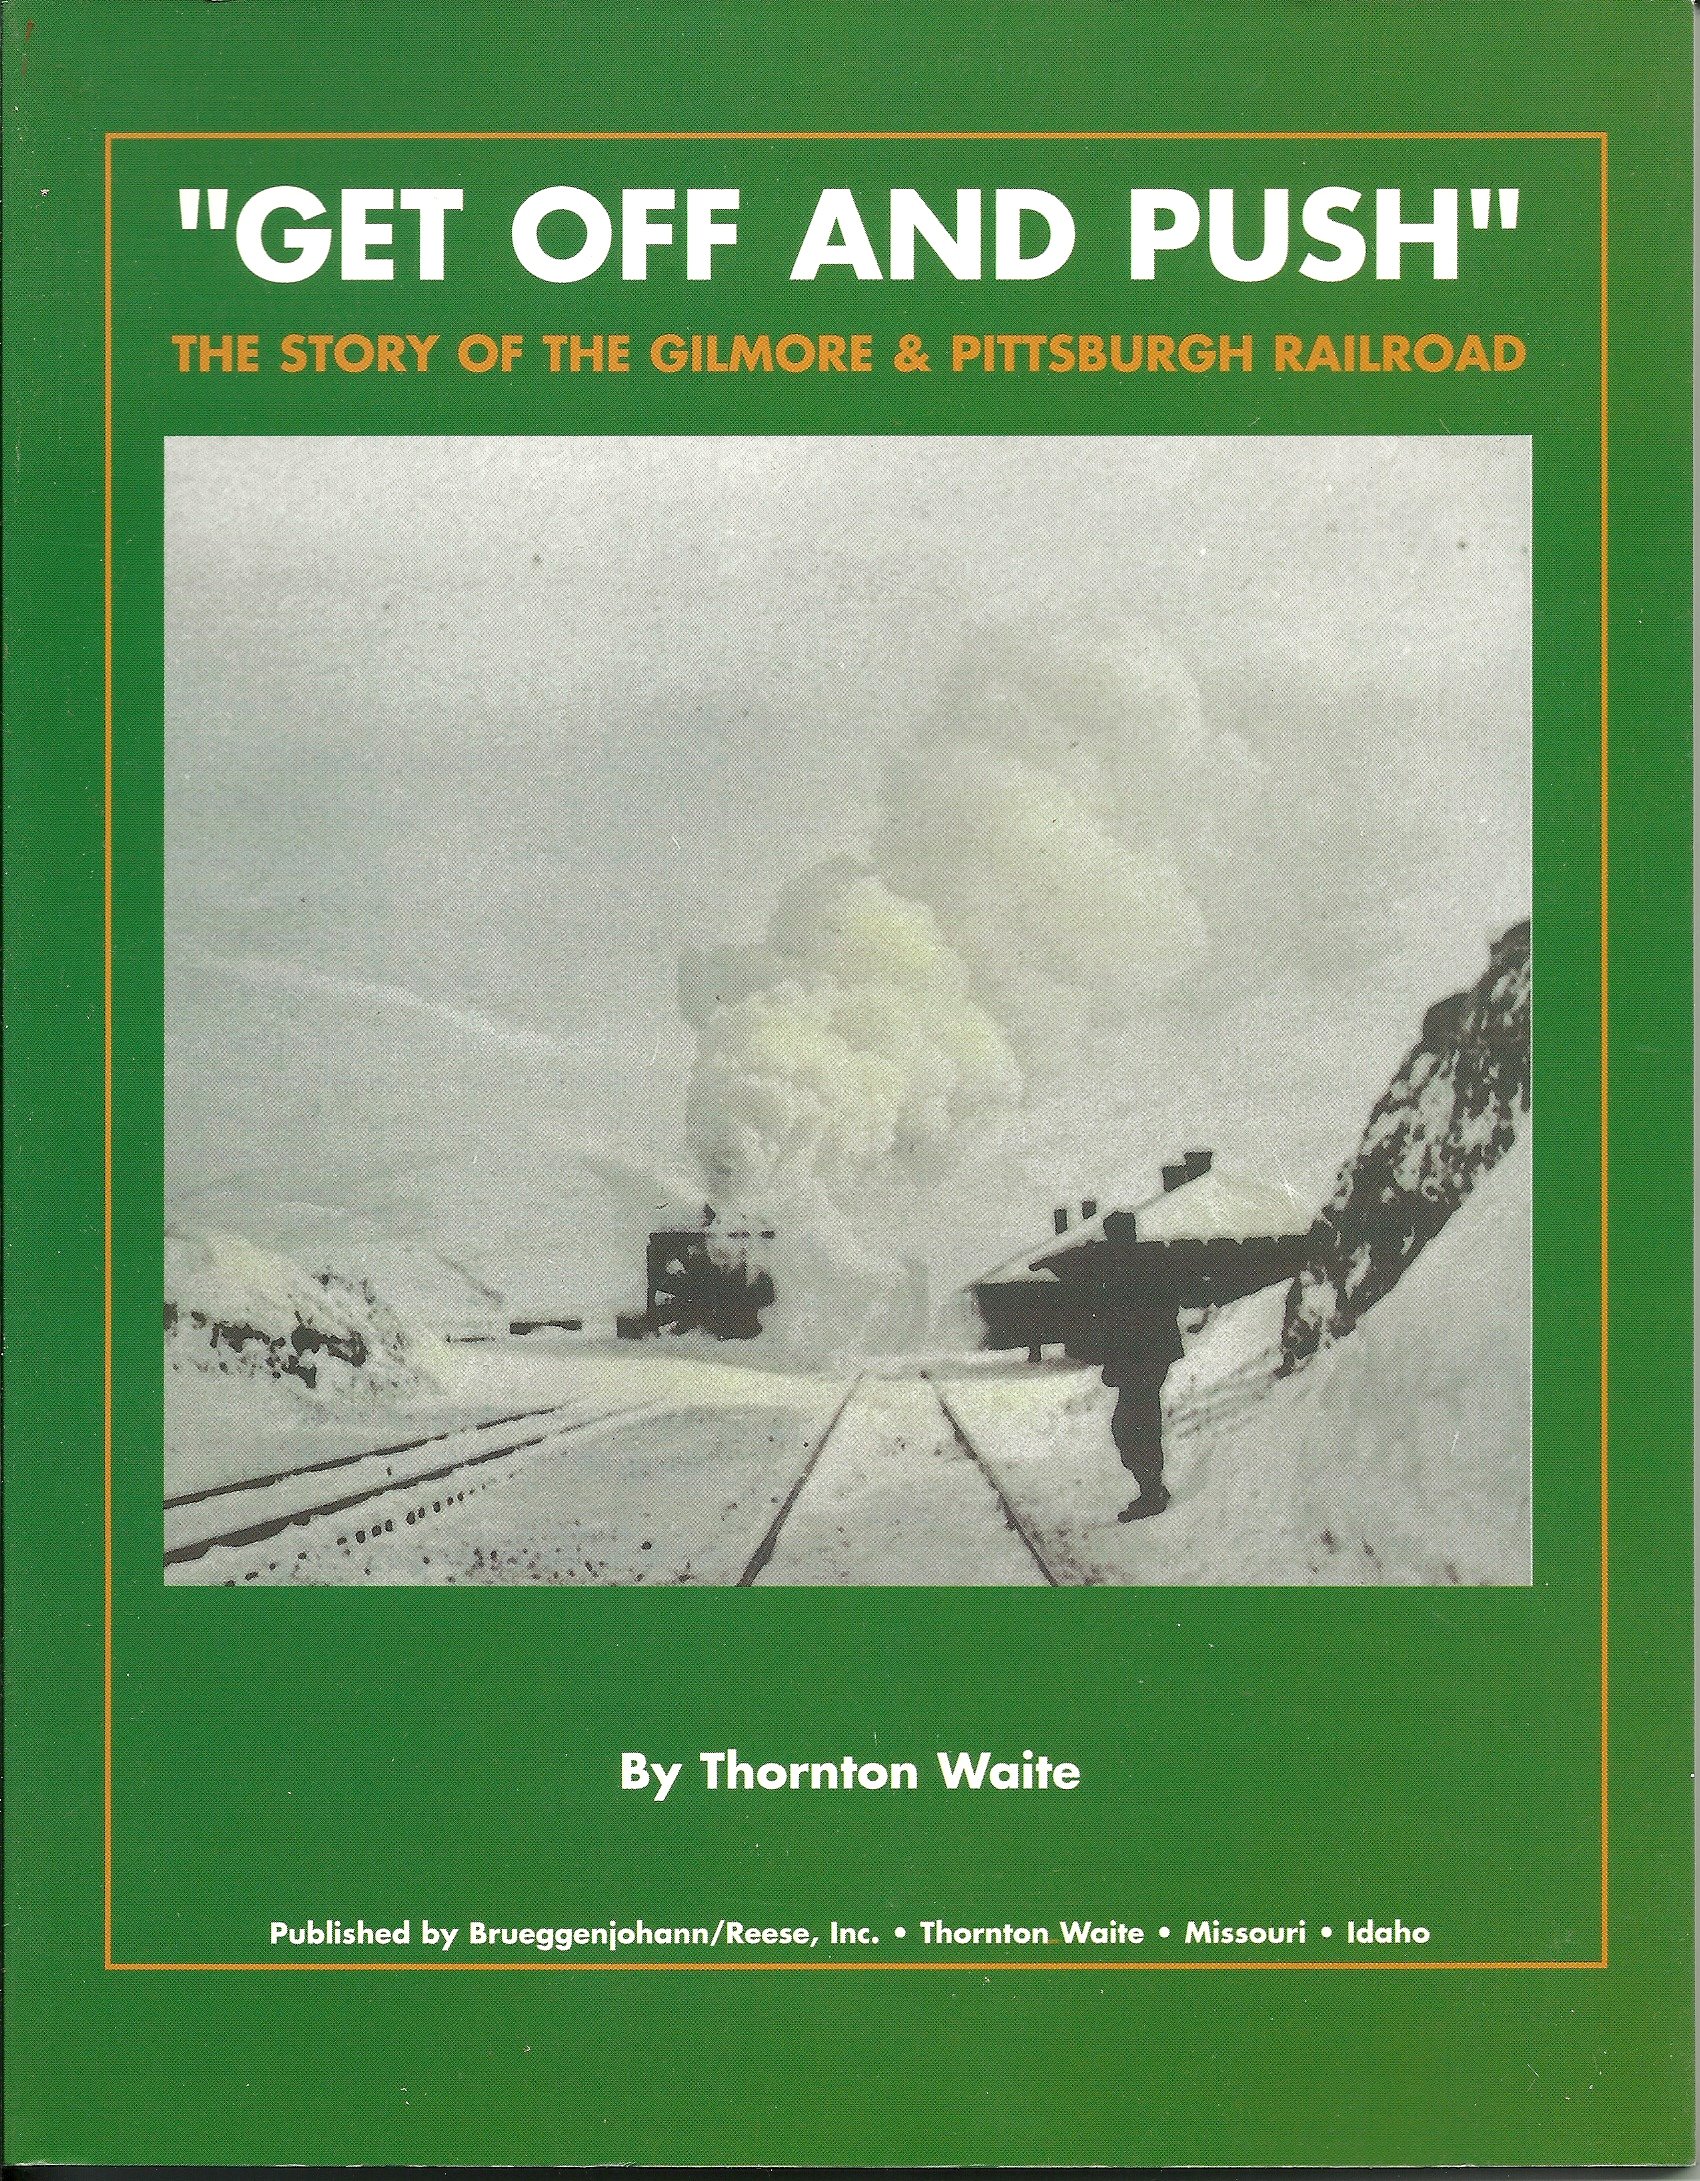 Get off and push: The story of the Gilmore & Pittsburgh Railroad (book cover)